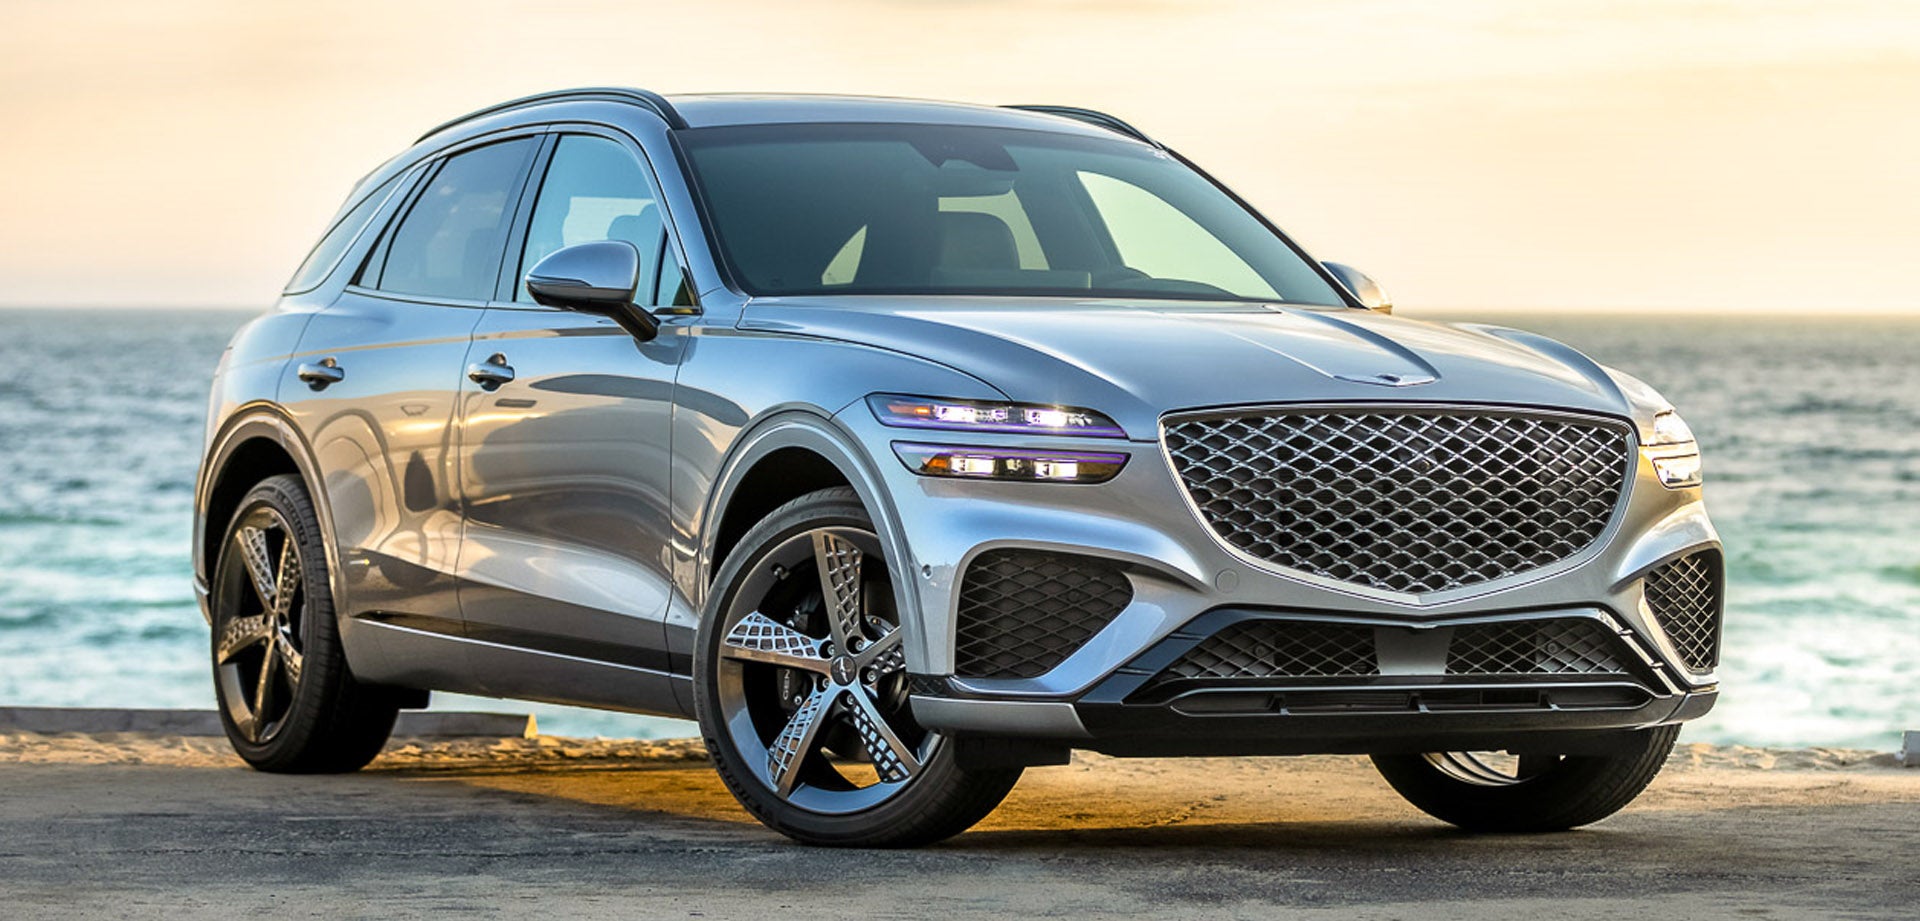 Genesis SUVs, Jeep Wrangler, Caddy Sedans Top List of February’s Most Marked-Up Cars